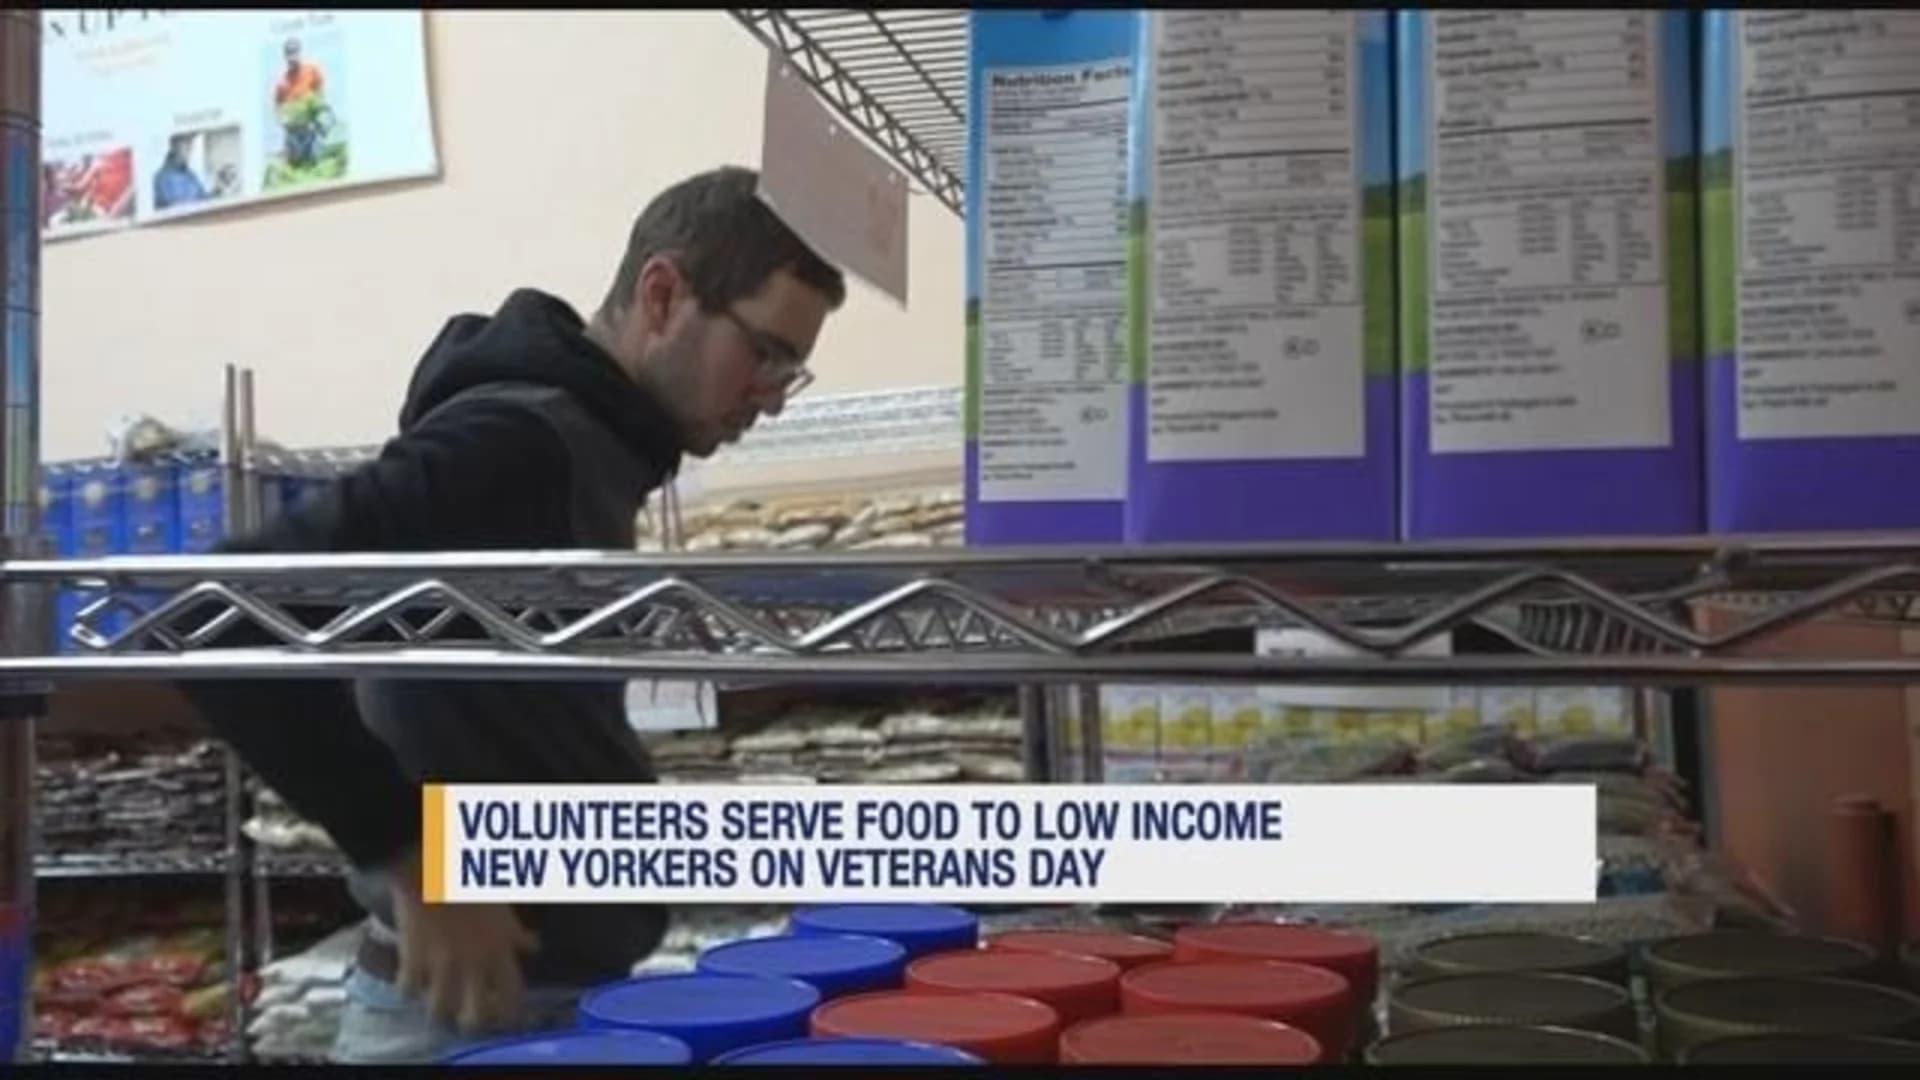 Food pantry partners with community service organization to recruit volunteers